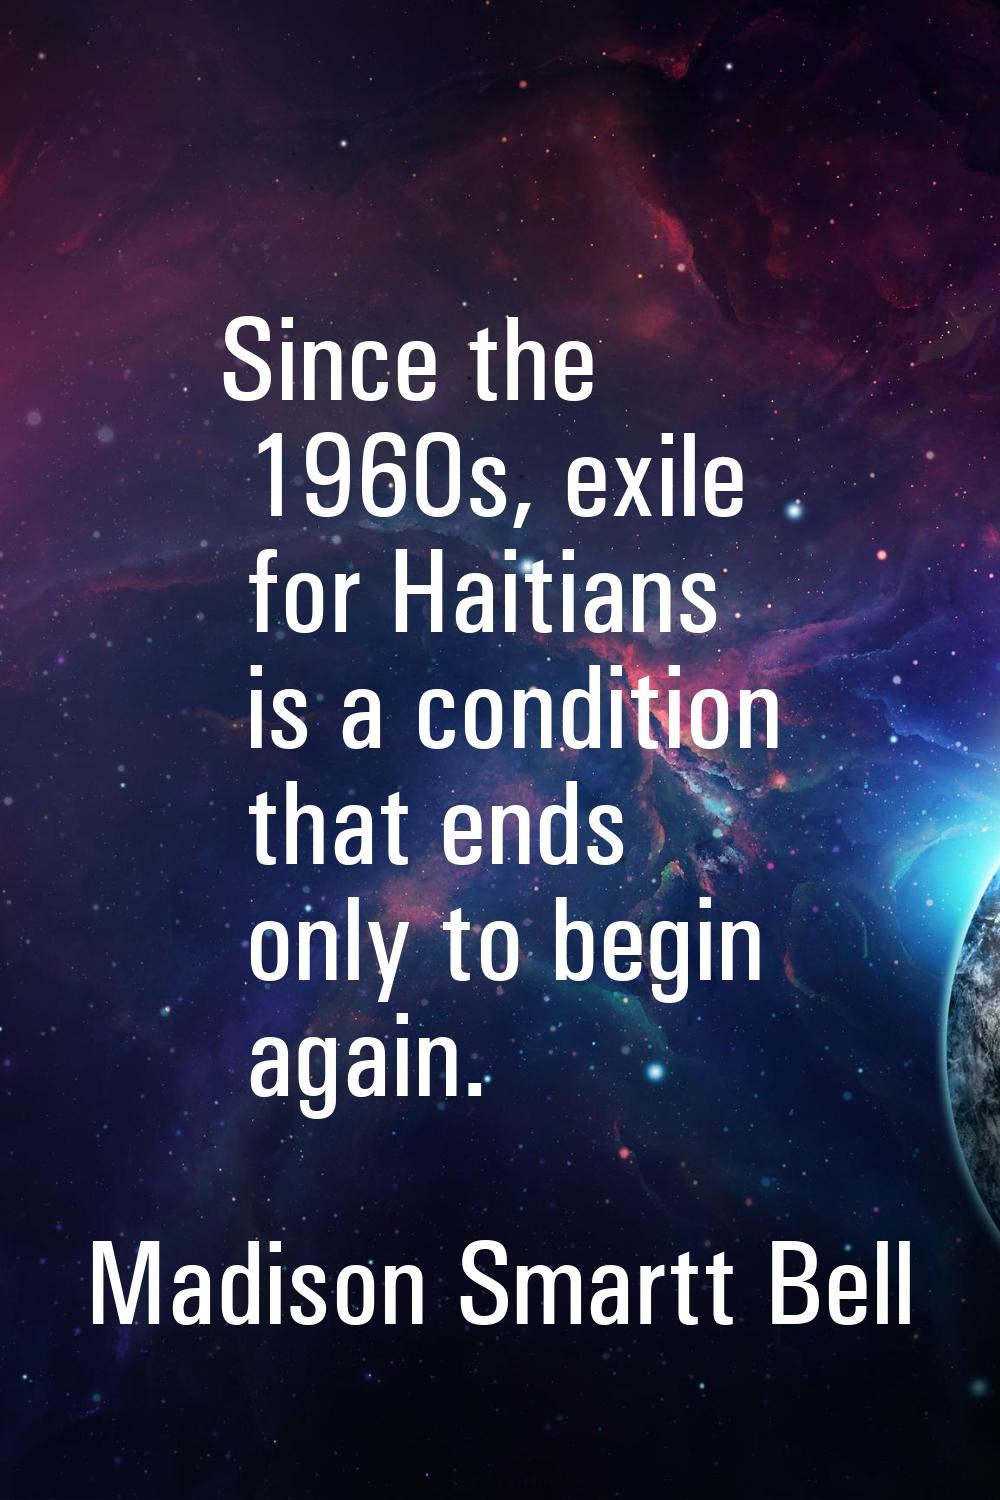 Since the 1960s, exile for Haitians is a condition that ends only to begin again.